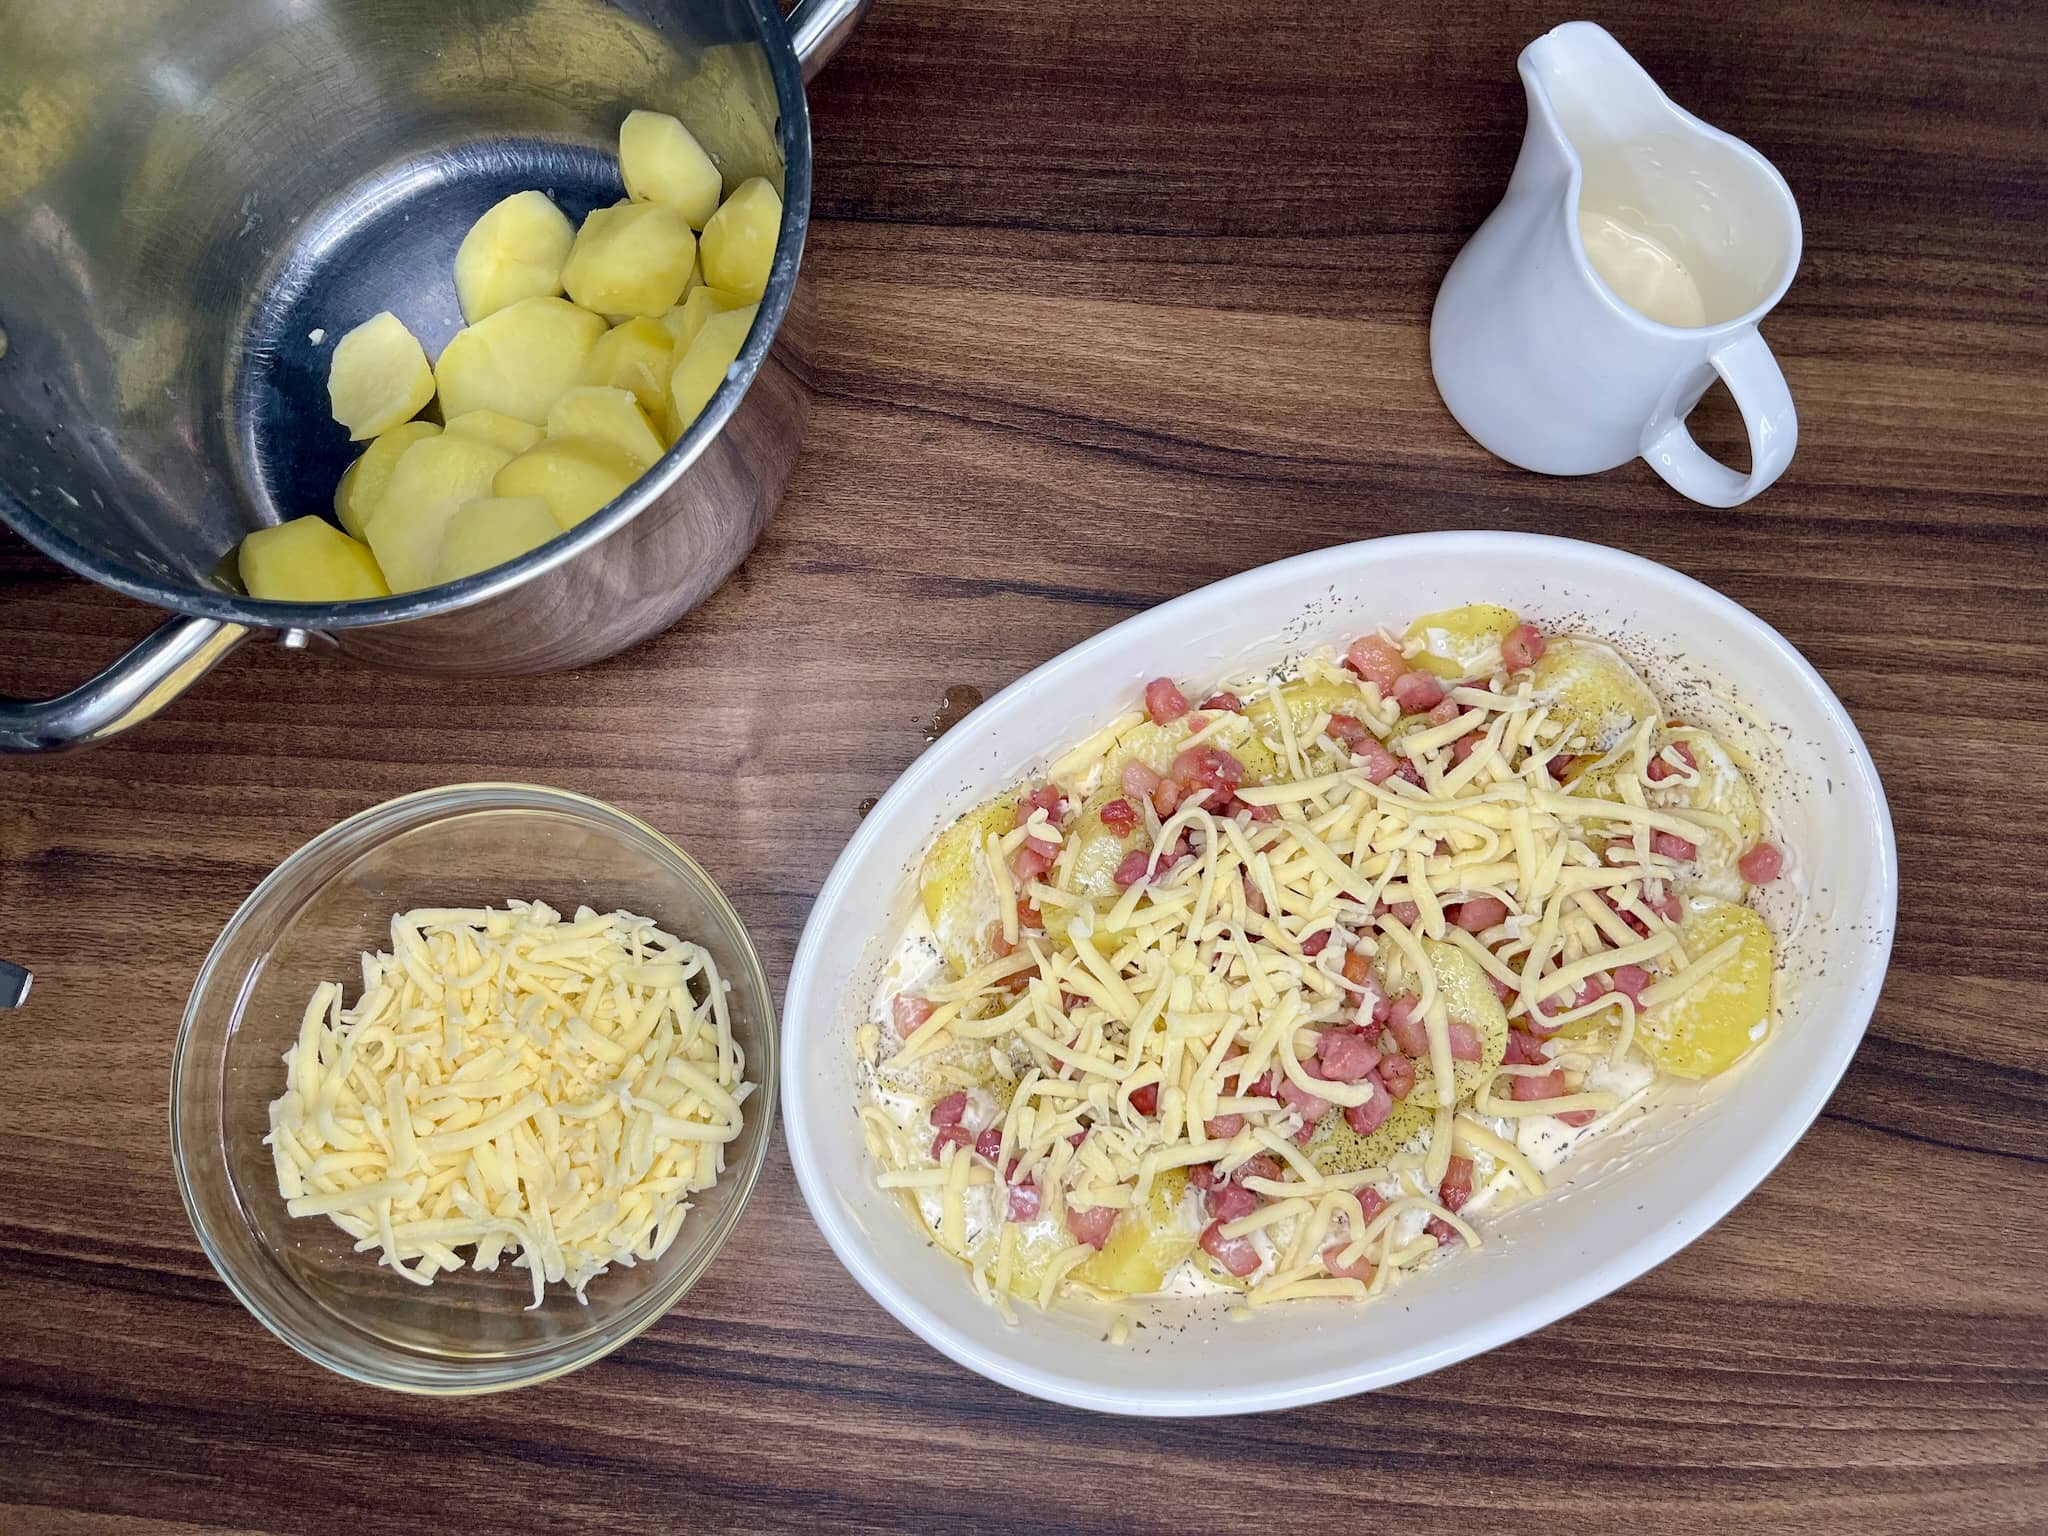 Preparing a dish for Cheesy Baked Potatoes with all ingredients in a dish